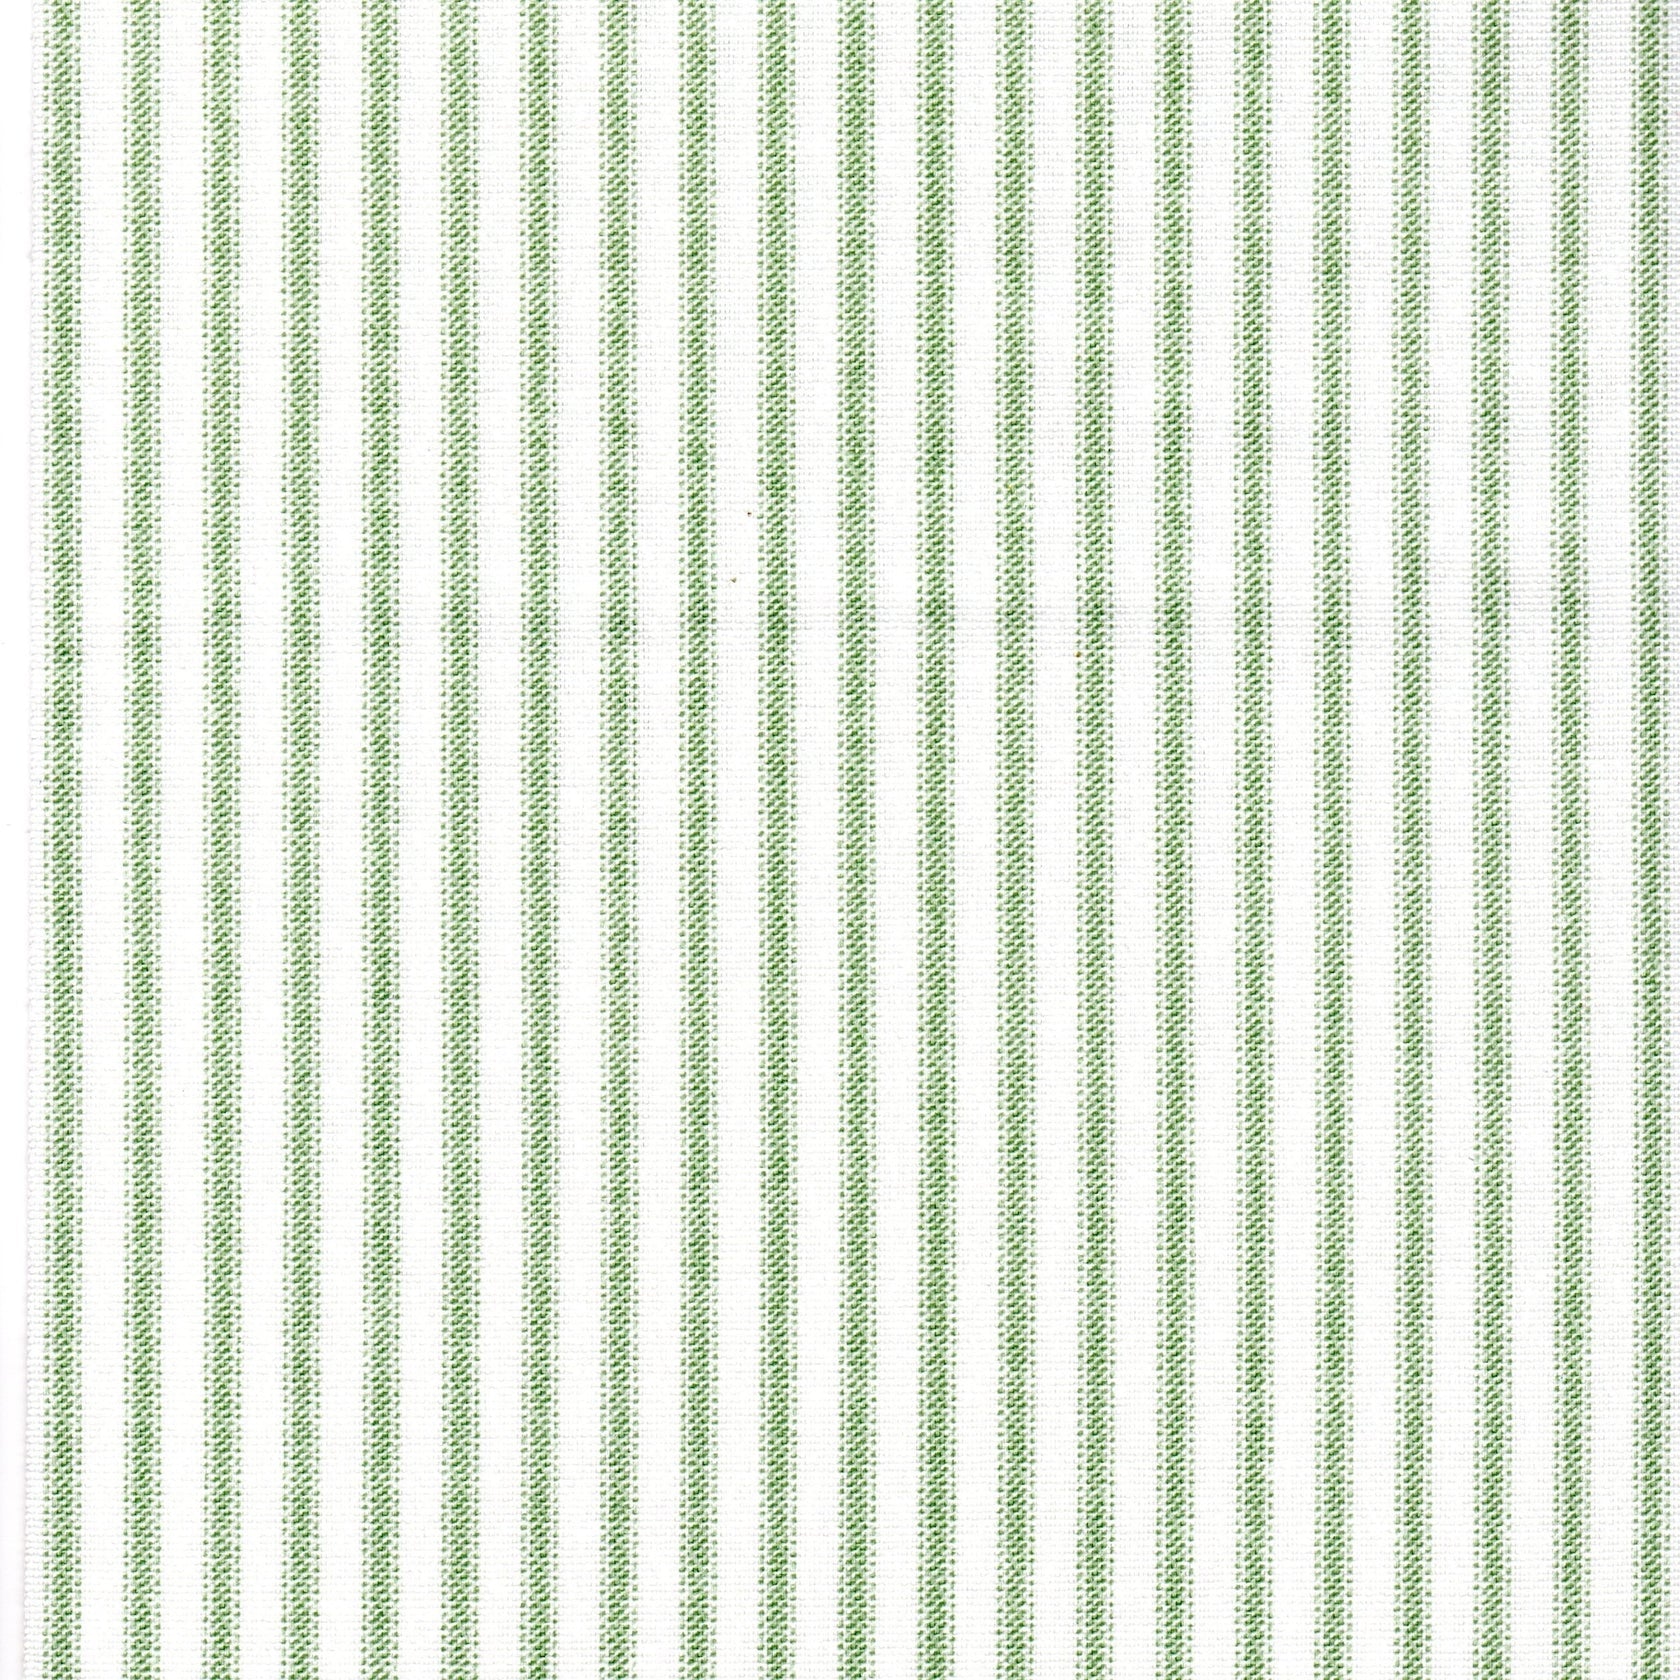 gathered bedskirt in Classic Sage Green Ticking Stripe on White